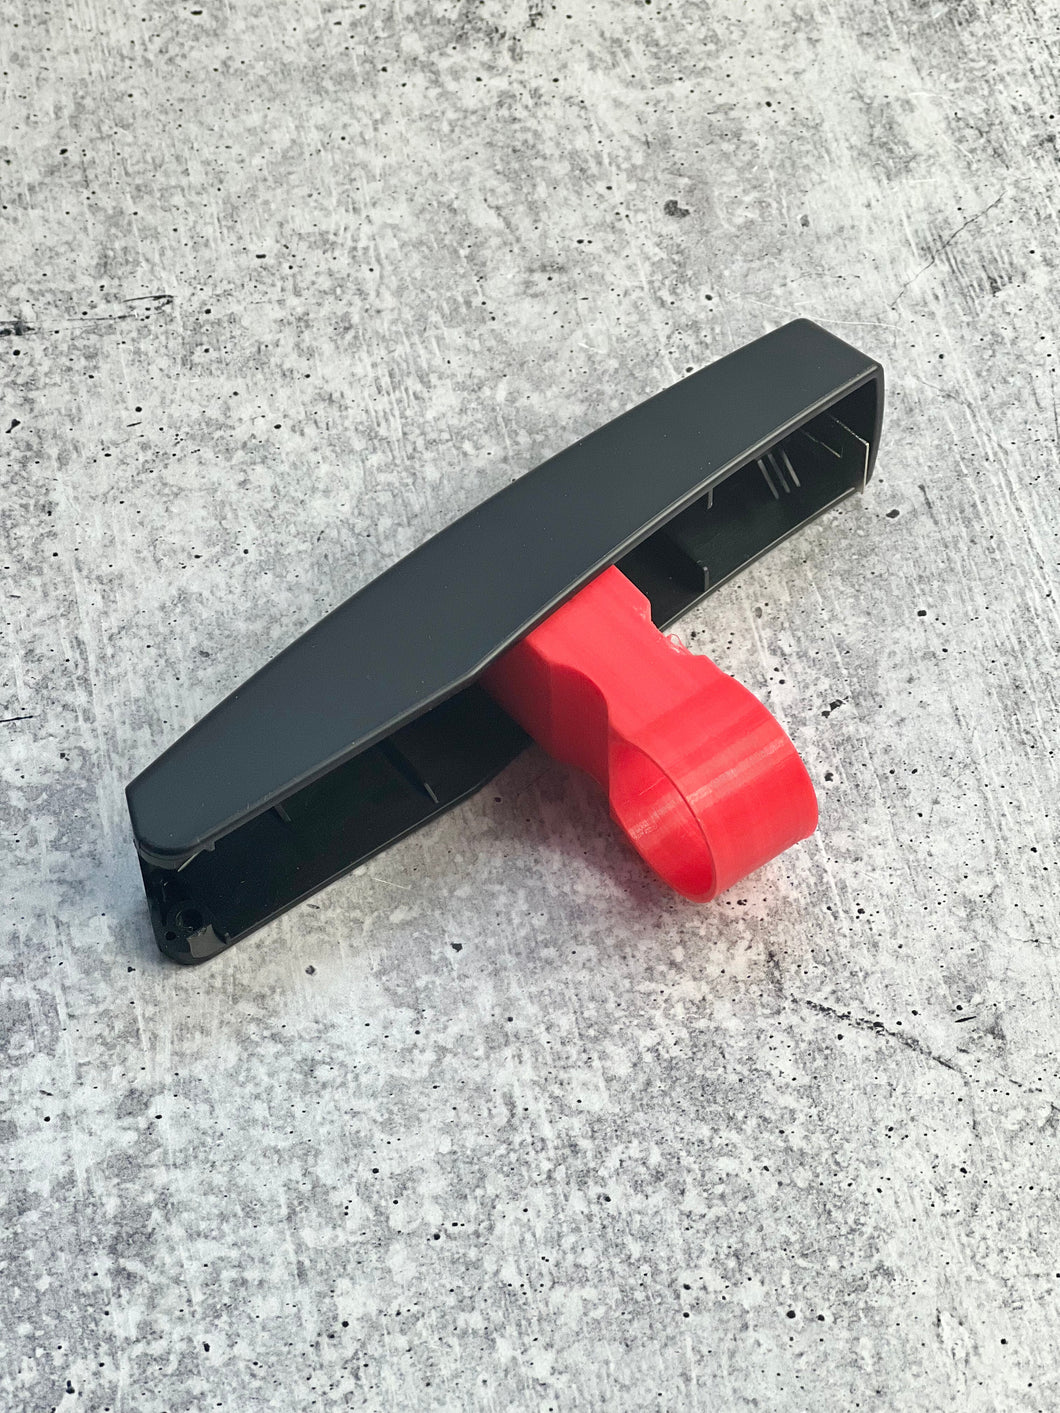 CLEARANCE - Stapler Adapter for Cup Turner - 1/2